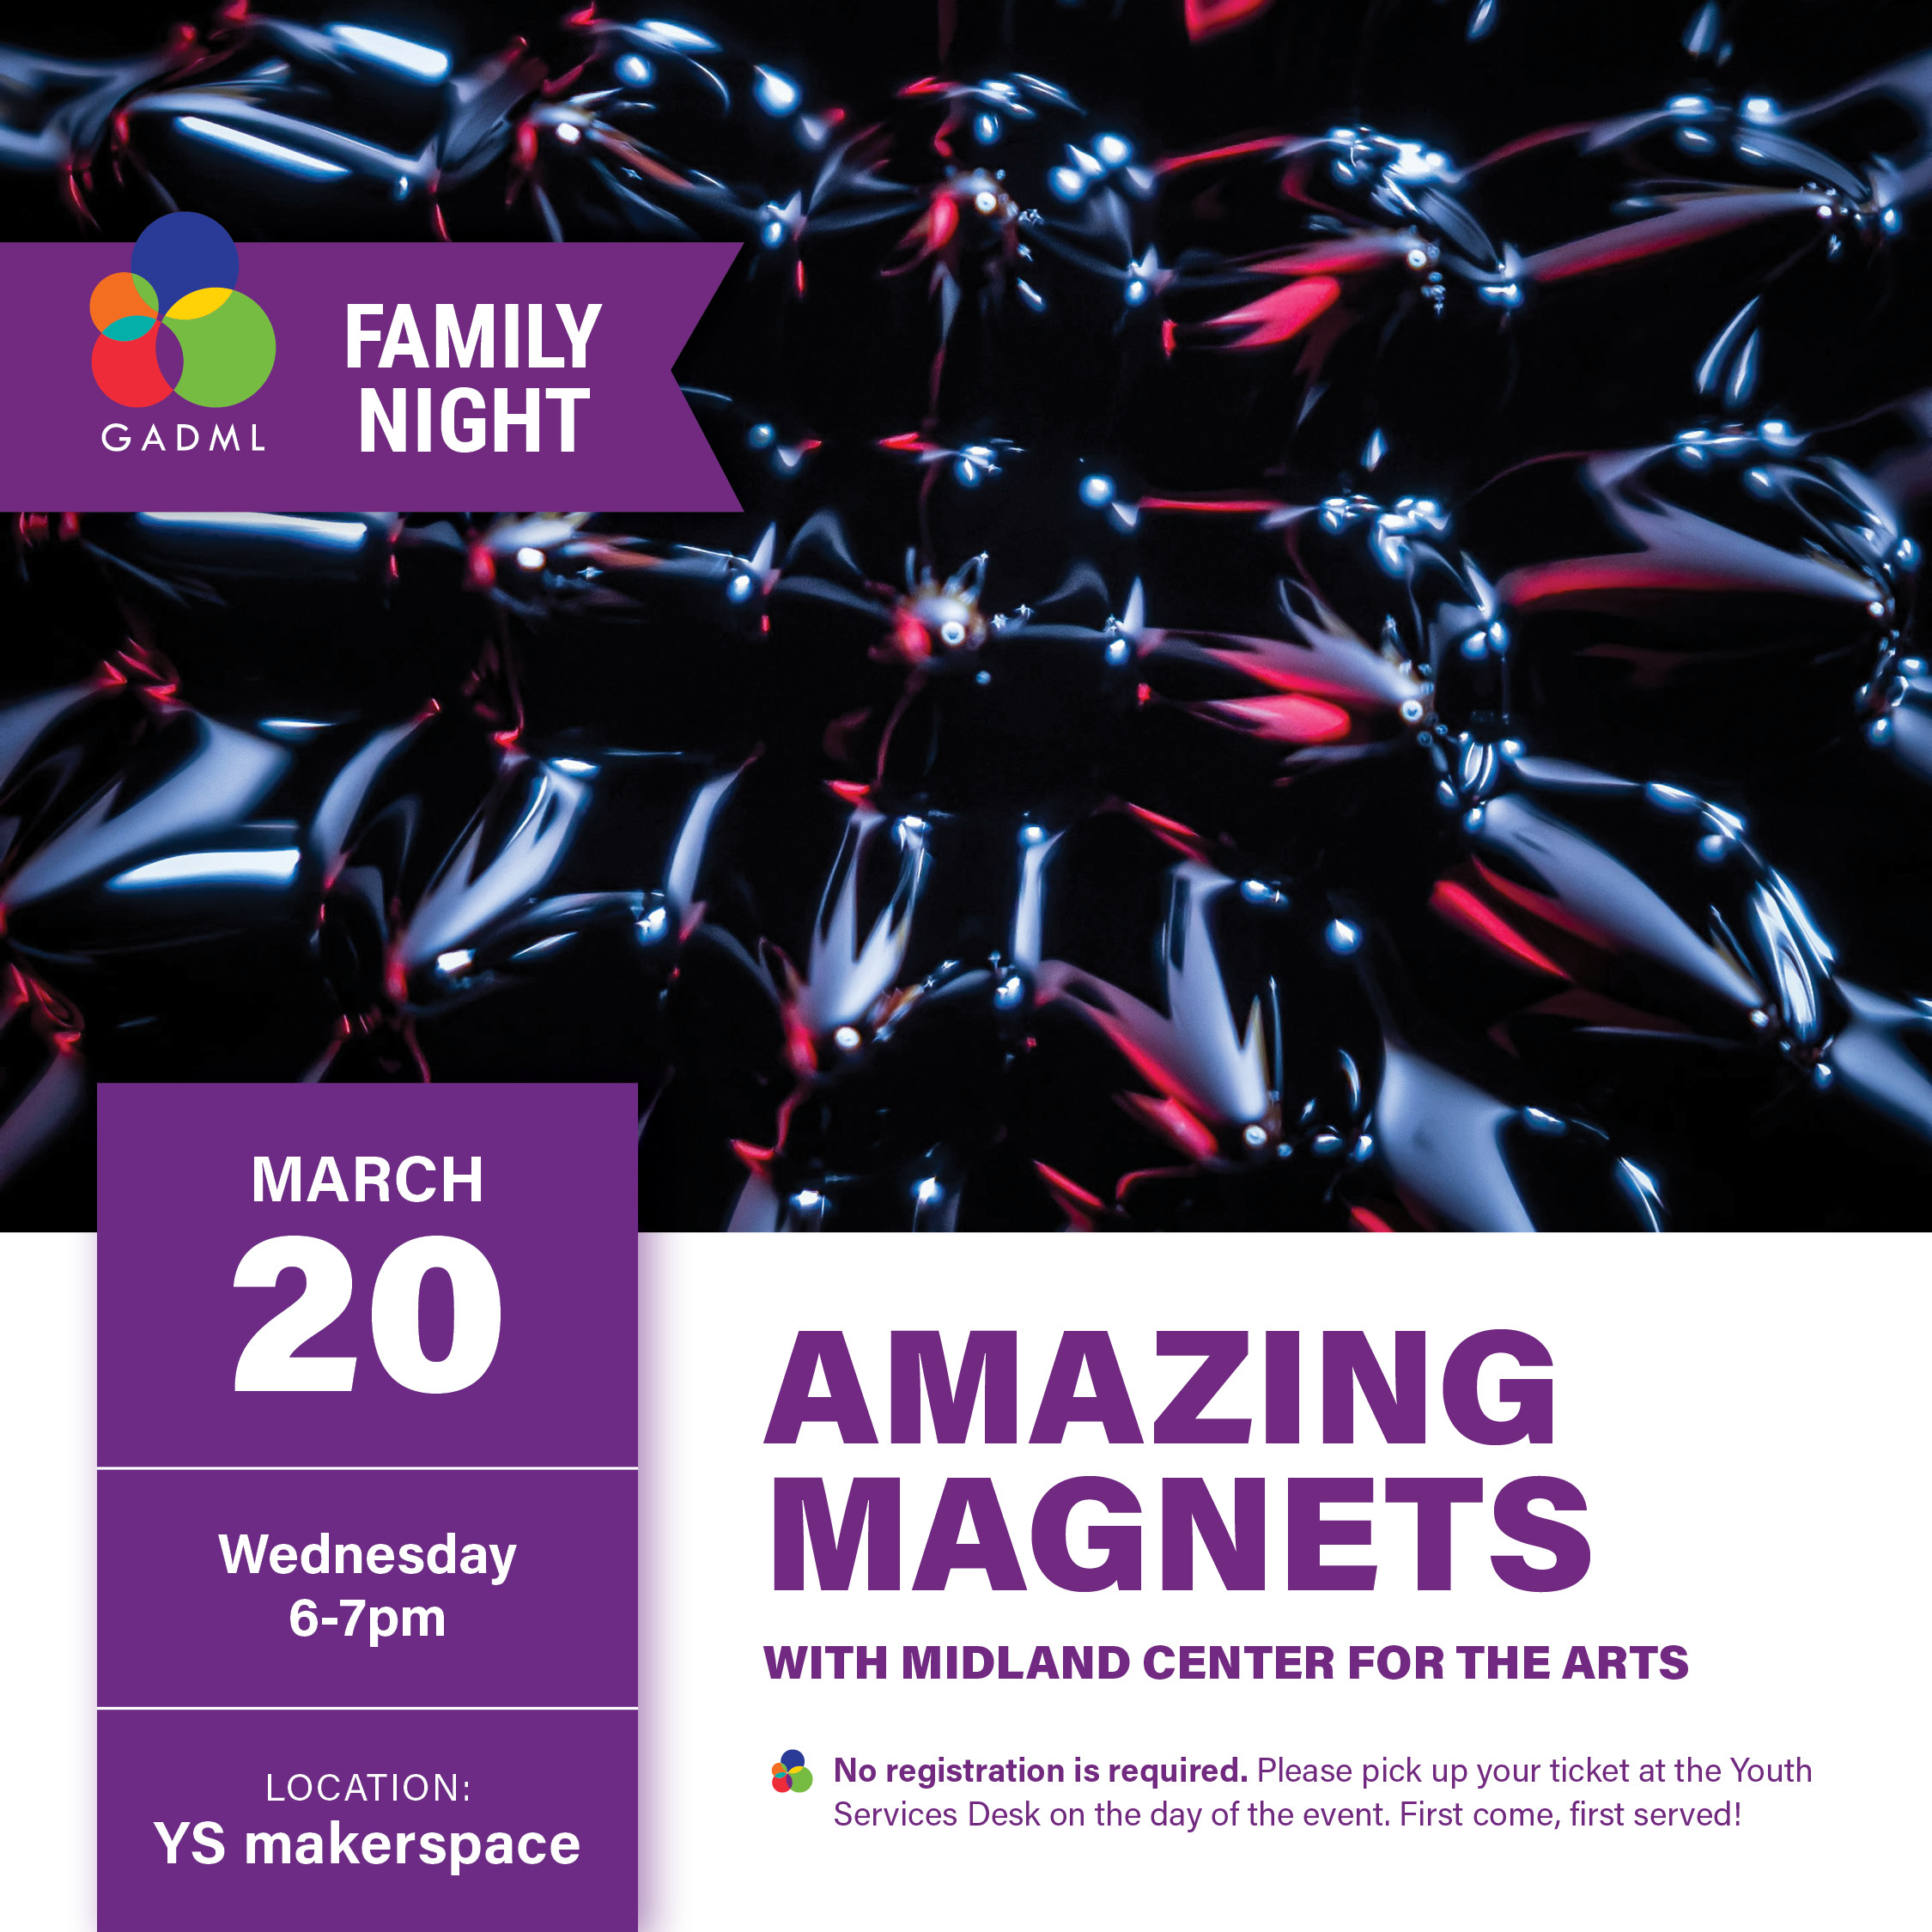 Family Night: Amazing Magnets with the Midland Center for the Arts